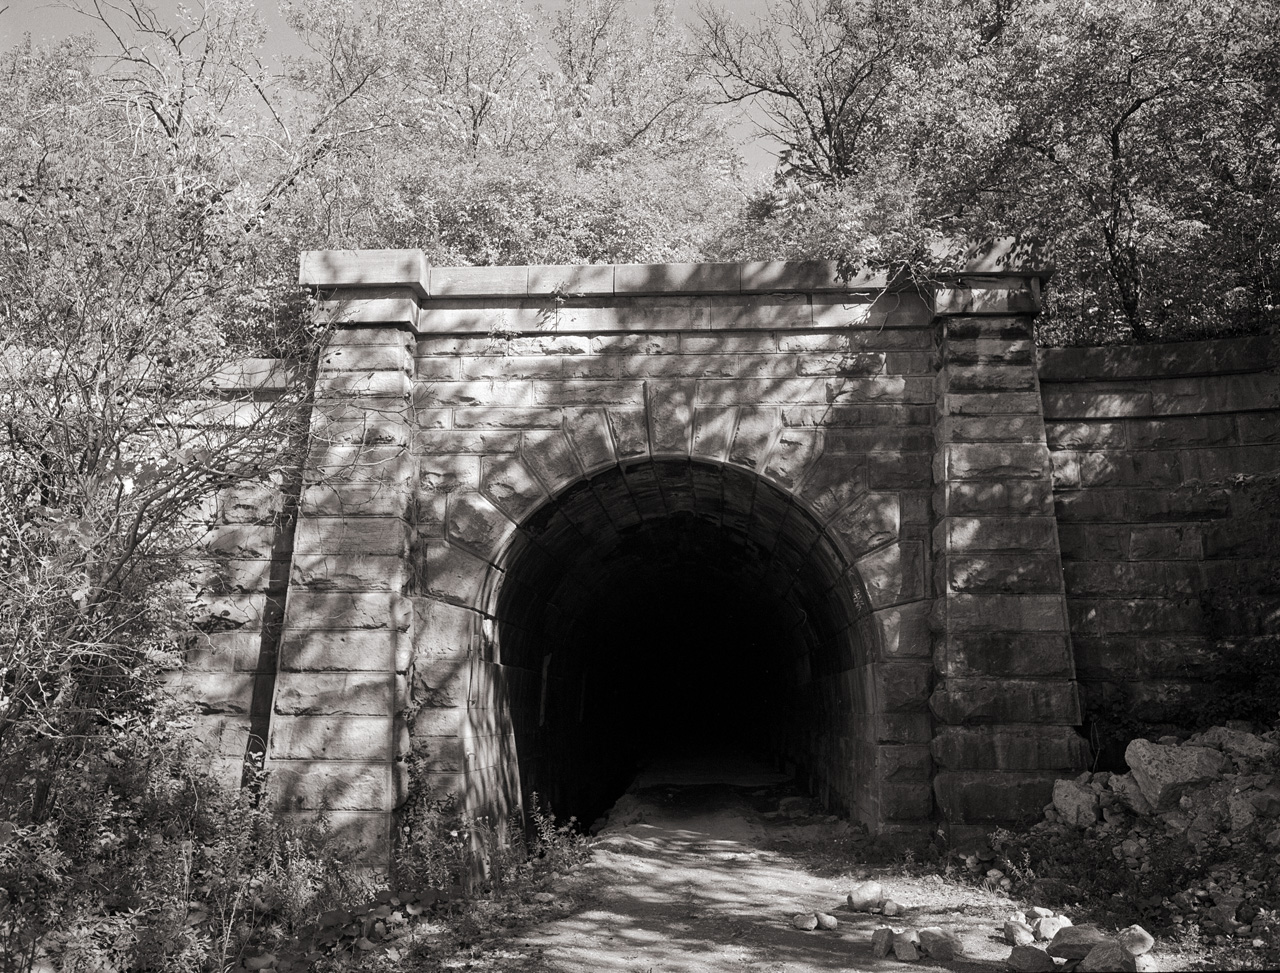 There are few tunnels in southern Ontario.  Here is the western portal of the 700 foot long tunnel built by the Great Western Railway under the third Welland Canal (the current canal is the fourth), between locks 18 & 19. It was faced with local limestone and known as the Merritton Tunnel when it was opened in 1887.  

After about ten years of use, the mainline (was it known as the Grimsby Sub in those days?) was double tracked and a swing bridge, still in use today, was built. There is a picture here of this bridge still spanning the no longer used third canal: http://www.railpictures.ca/?attachment_id=18395  

The tunnel was abandoned in 1915, and since this photo was taken, I believe it has been walled up.  Even when accessible you could not pass through the tunnel, as it has flooded at its lowest point.  And being built on a curve you can’t see through it either.   Known locally as the ‘Blue Ghost Tunnel’, this is likely due to the number of deaths that it has caused.  According to reports, over a hundred men died in its construction, which seems like a lot given its short length and that tunnelling technology was well established by the late 19th century.  

And in 1903 a head-on collision, apparently on the approach to the western portal, killed the firemen on both locomotives.  ,

Here is the account from the St. Catherines Daily Standard, January 3rd 1903.

"BAD TRAIN WRECK, No.4 Express Collides with a light Mogul Near Merritton Tunnel." 

"On the Grand Trunk rail line near Merritton a serious and fatal accident occurred near the Merritton Tunnel today. The accident occurred around 7:03am at a point about 100 yards from the tunnels western entrance. Engine Number 975 was an 80 ton mogul train to leave from Niagara falls at 6:00am each morning and run through to Hamilton . 

Engine Number 4 express train was one of the best and fastest trains on the G.T. R. and was scheduled to arrive in Merritton at 6:28am. The Engineer's name was Duke and the fireman that manned the boiler was Abraham Desult both from Sarnia. As nearly as can be learned it was 7:03 am when the ill-fated express train passed a small telegraph station near the tunnel, 

A few moments later and almost one third of a mile down the track the engine of the express train and the light mogul train met with a terrible crash. Both engines at the time of the collision were in full steam when they met head on. The accident happened on a sharp curve where both engineers could not see each other for a distance of 200ft. The estimated speed of both trains were about 22MPH at the time of the collision. 

Both engineers escaped with only broken limbs and minor cuts to face and arms while Mr. Charles Horning (firemen) for the express train was killed instantly. The reporter described the condition of the body as being jammed between the boiler and tender, his body was horribly mangled. When rescuers went to pull on the limbs of the man to try to free him they broke off. When some of the remains were taken away, his mid section was so tightly wedged between the tender and boiler that his remaining body could not be pulled free. It was even noted that his watch on one of his arms was still working...... 

The other firemen (Abraham Desult) from the mogul train was smashed into the boiler of the train, and received burns to 90% of his body. He was rushed to the St.Catharines General Hospital were he died 5 hours after the accident."